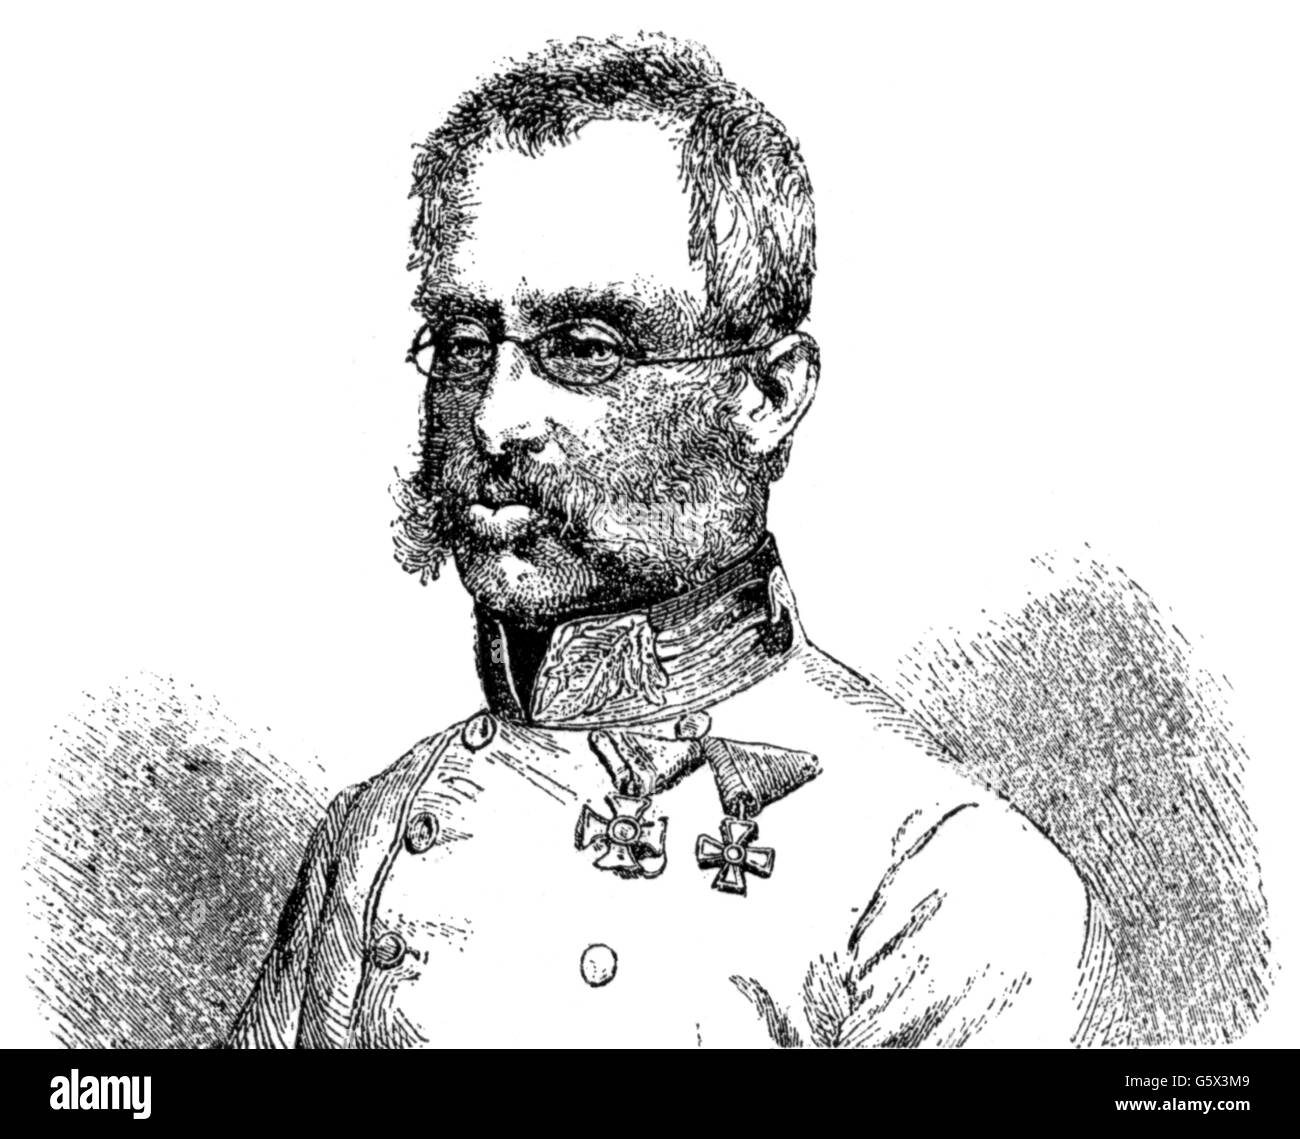 Albrecht, 3.8.1817 - 18.2.1895, Archduke of Austria, Austrian general, commander-in-chief of the Austrian South Army 1866, portrait, wood engraving, 19th century, Stock Photo